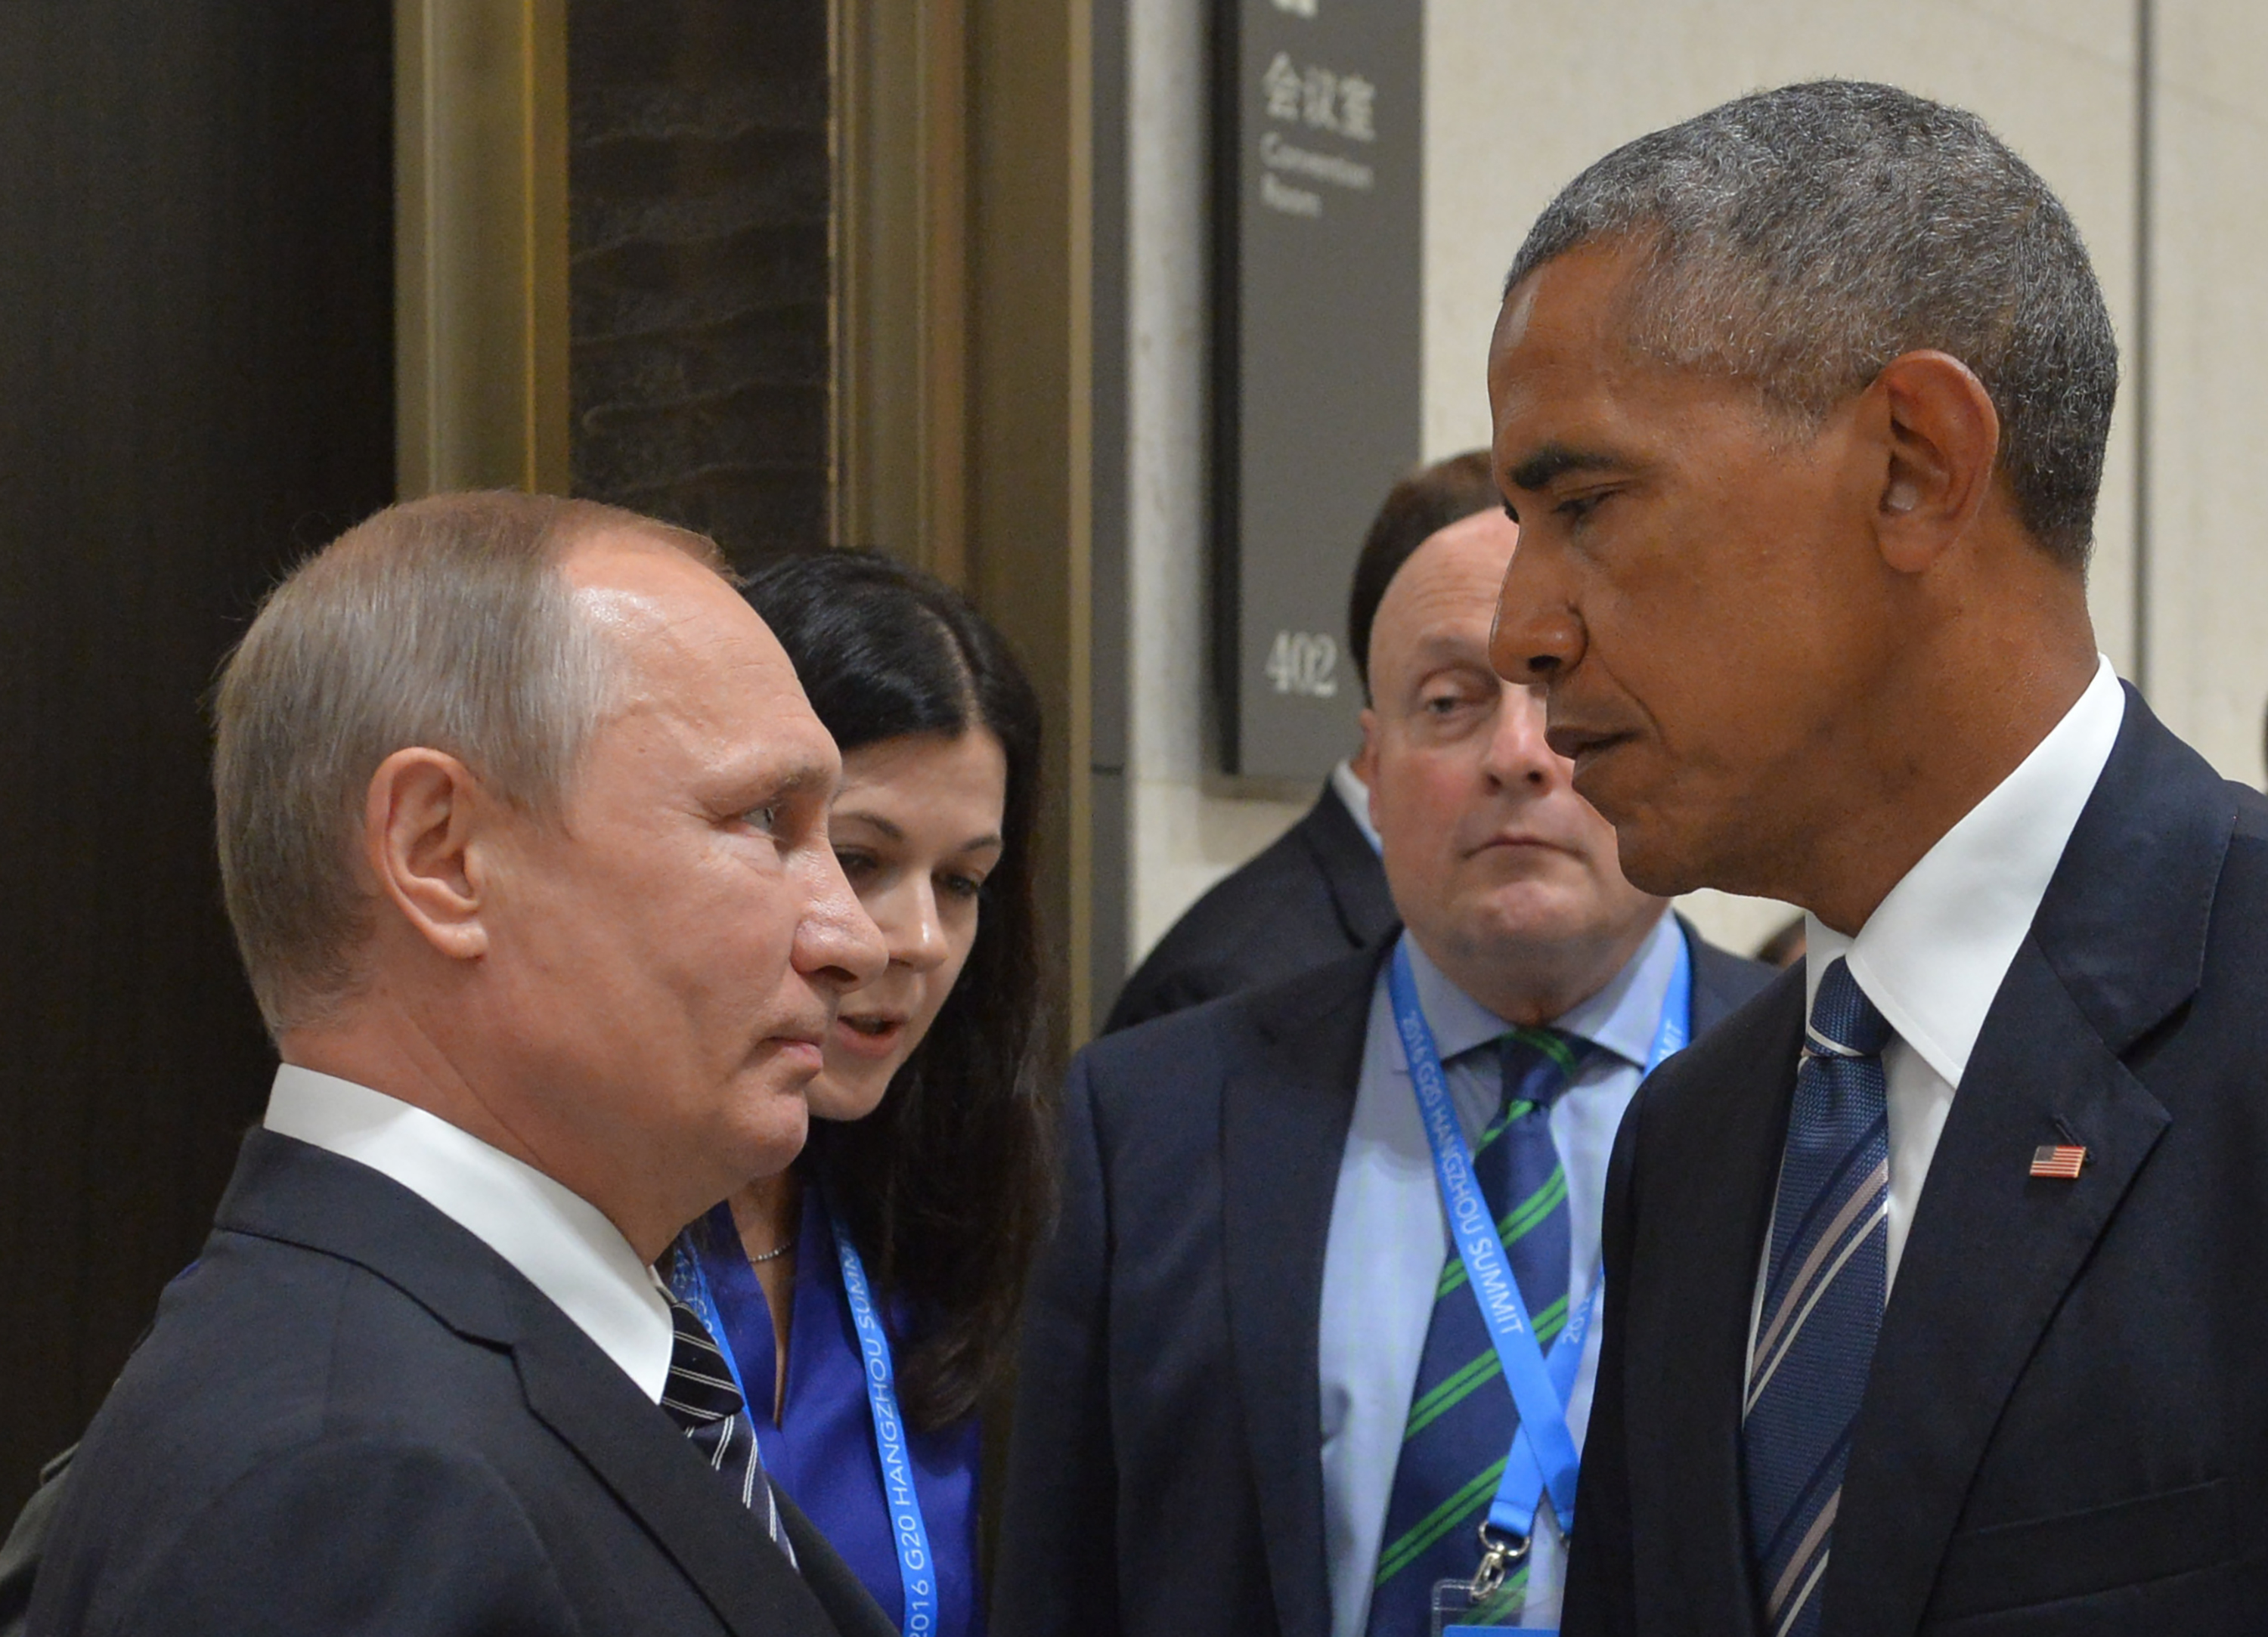 Russian President Vladimir Putin (L) meets with his U.S. counterpart Barack Obama on the sidelines of the G20 Leaders Summit in Hangzhou on September 5, 2016.